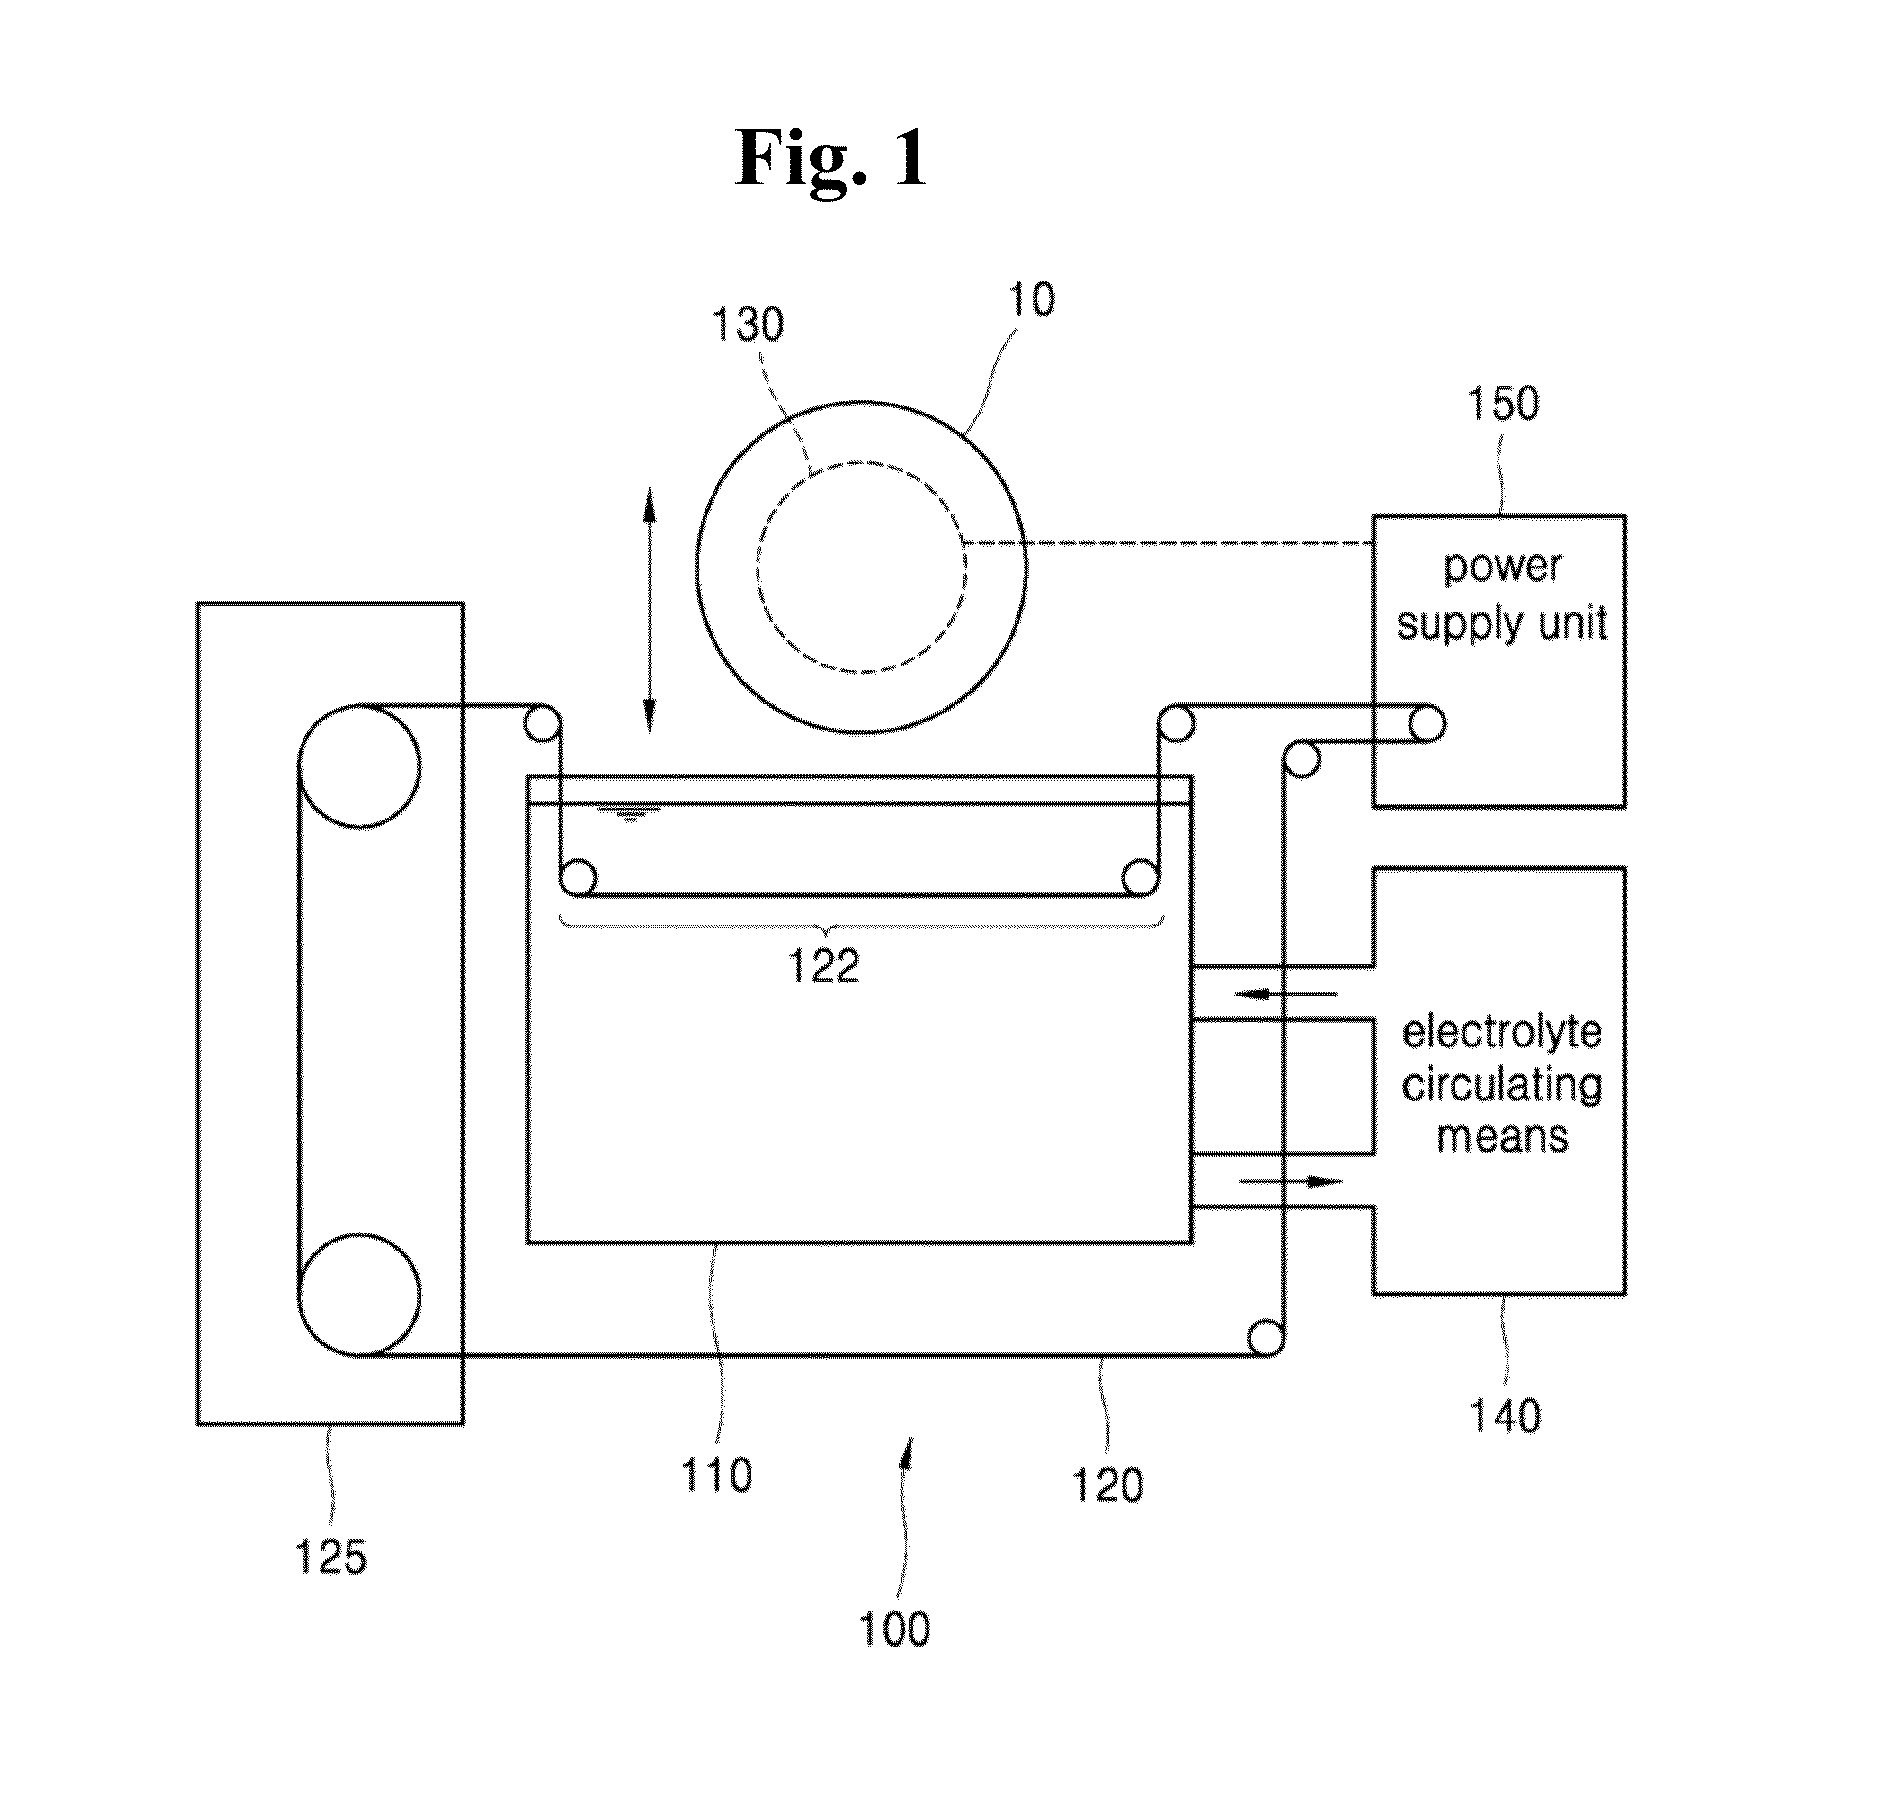 Silicon wafer slicing device using wire discharge machining